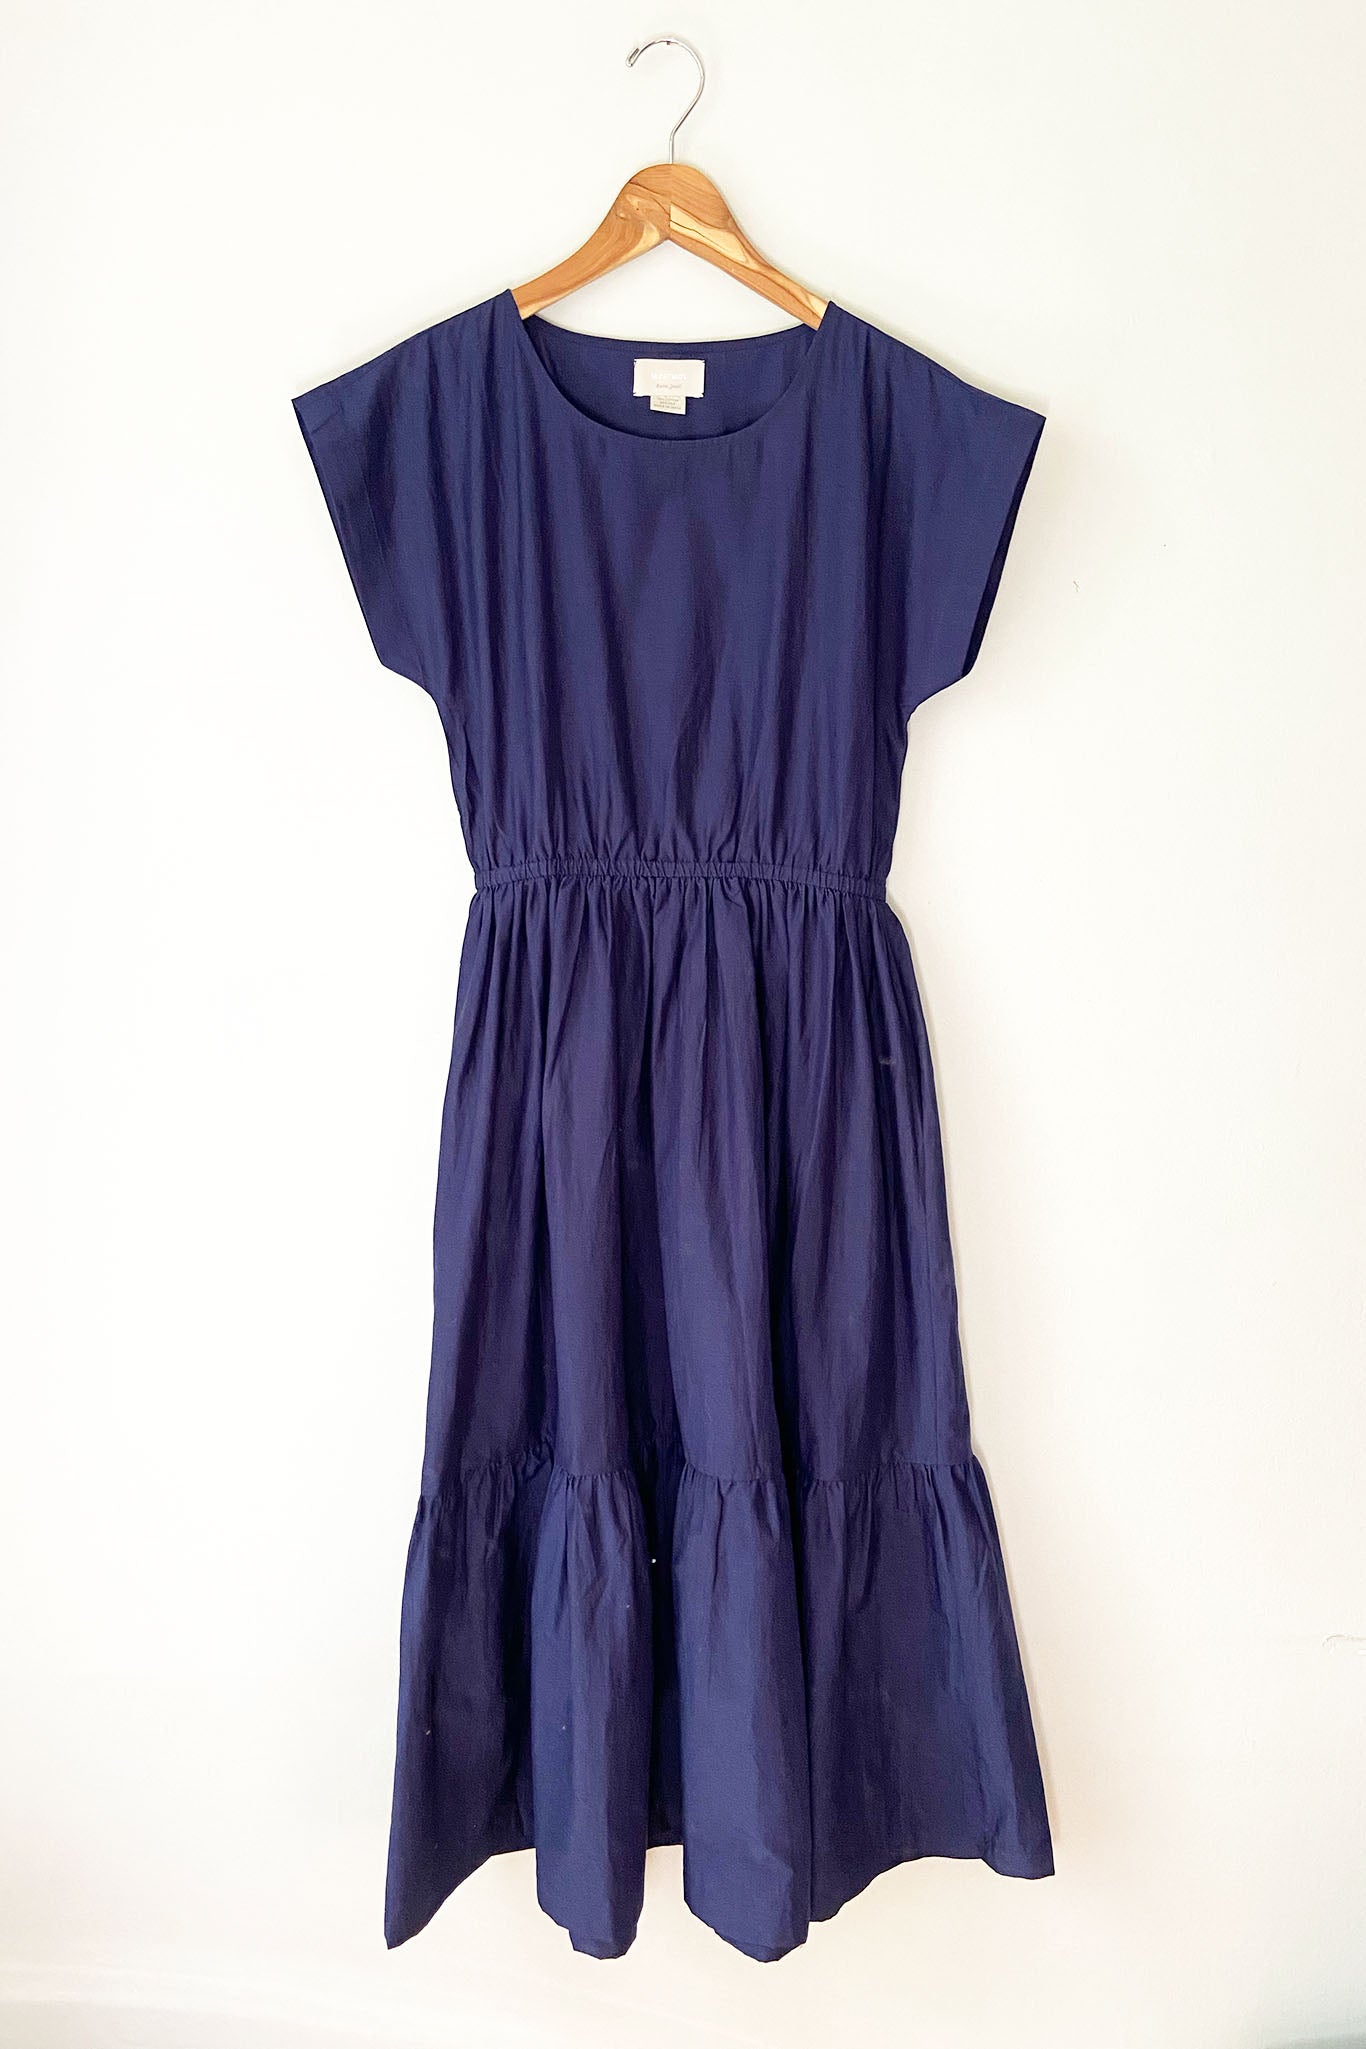 perfect summer sun dress for summer. Occasion dress. Jewel neck line with elastic waist and flowy skirt.